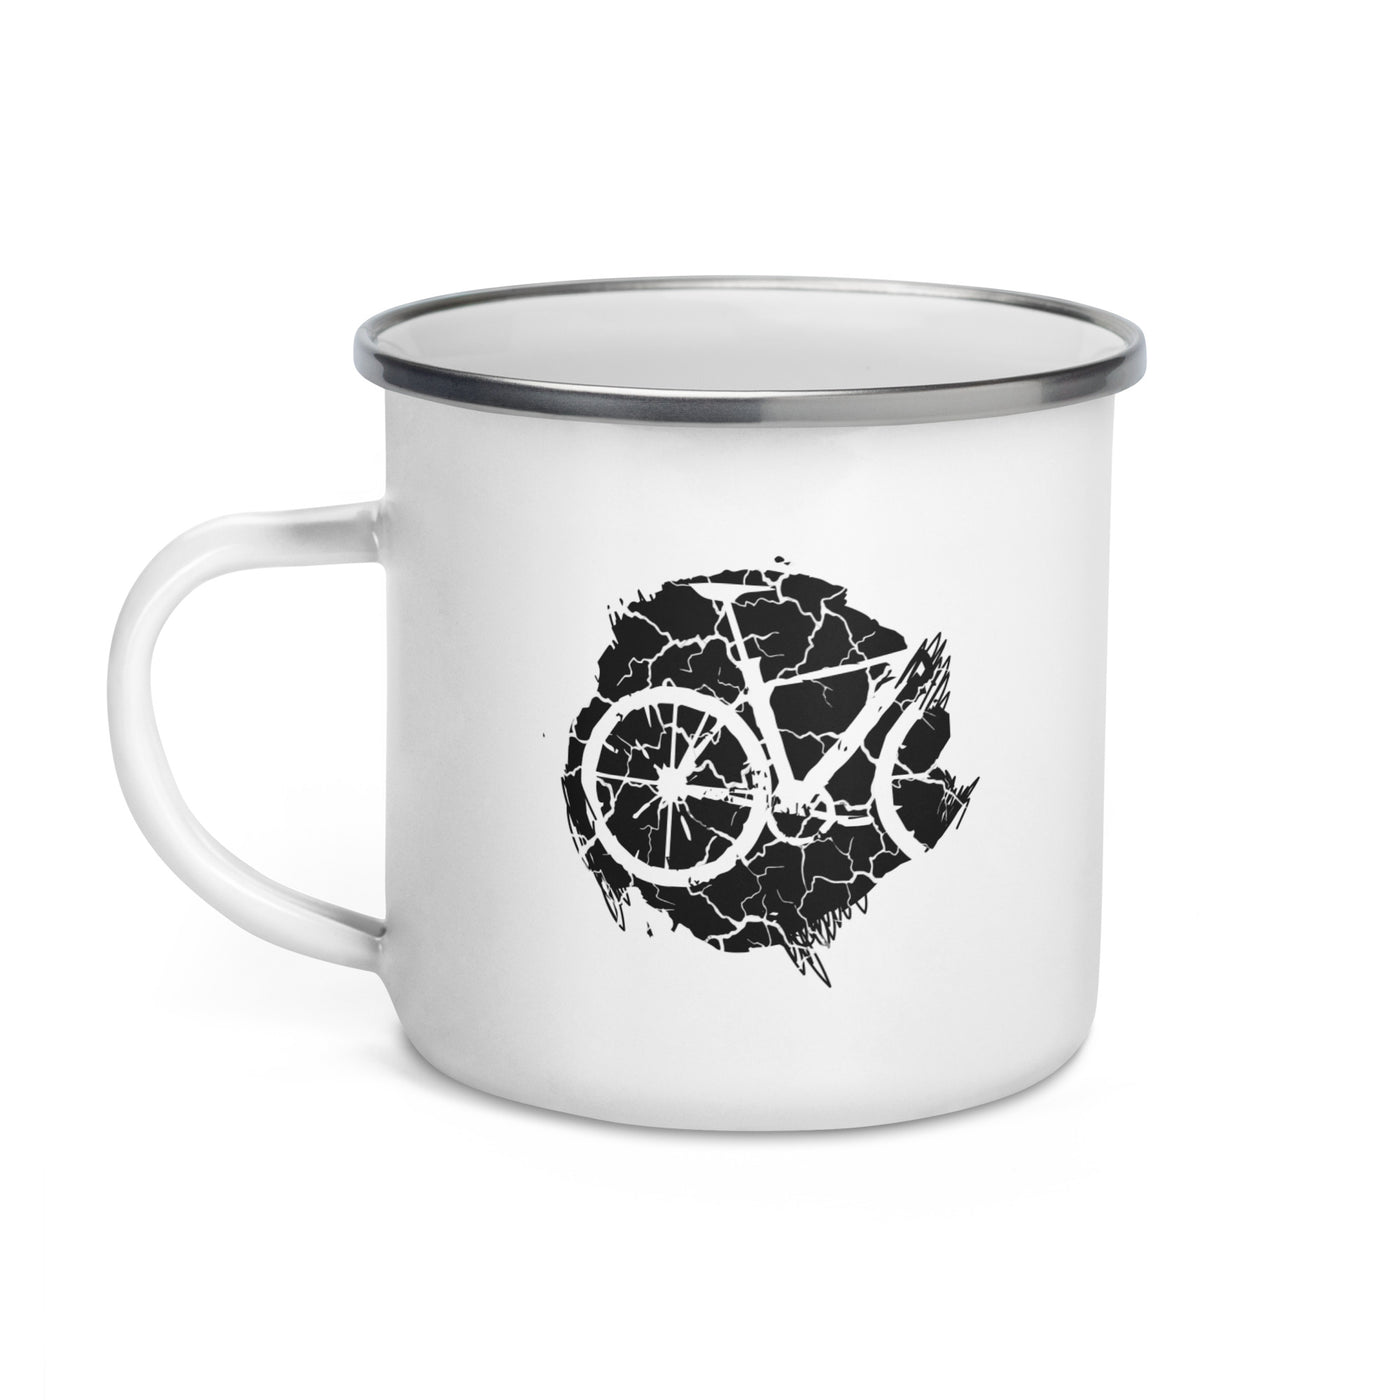 Grunge Circle - Cycling - Emaille Tasse fahrrad